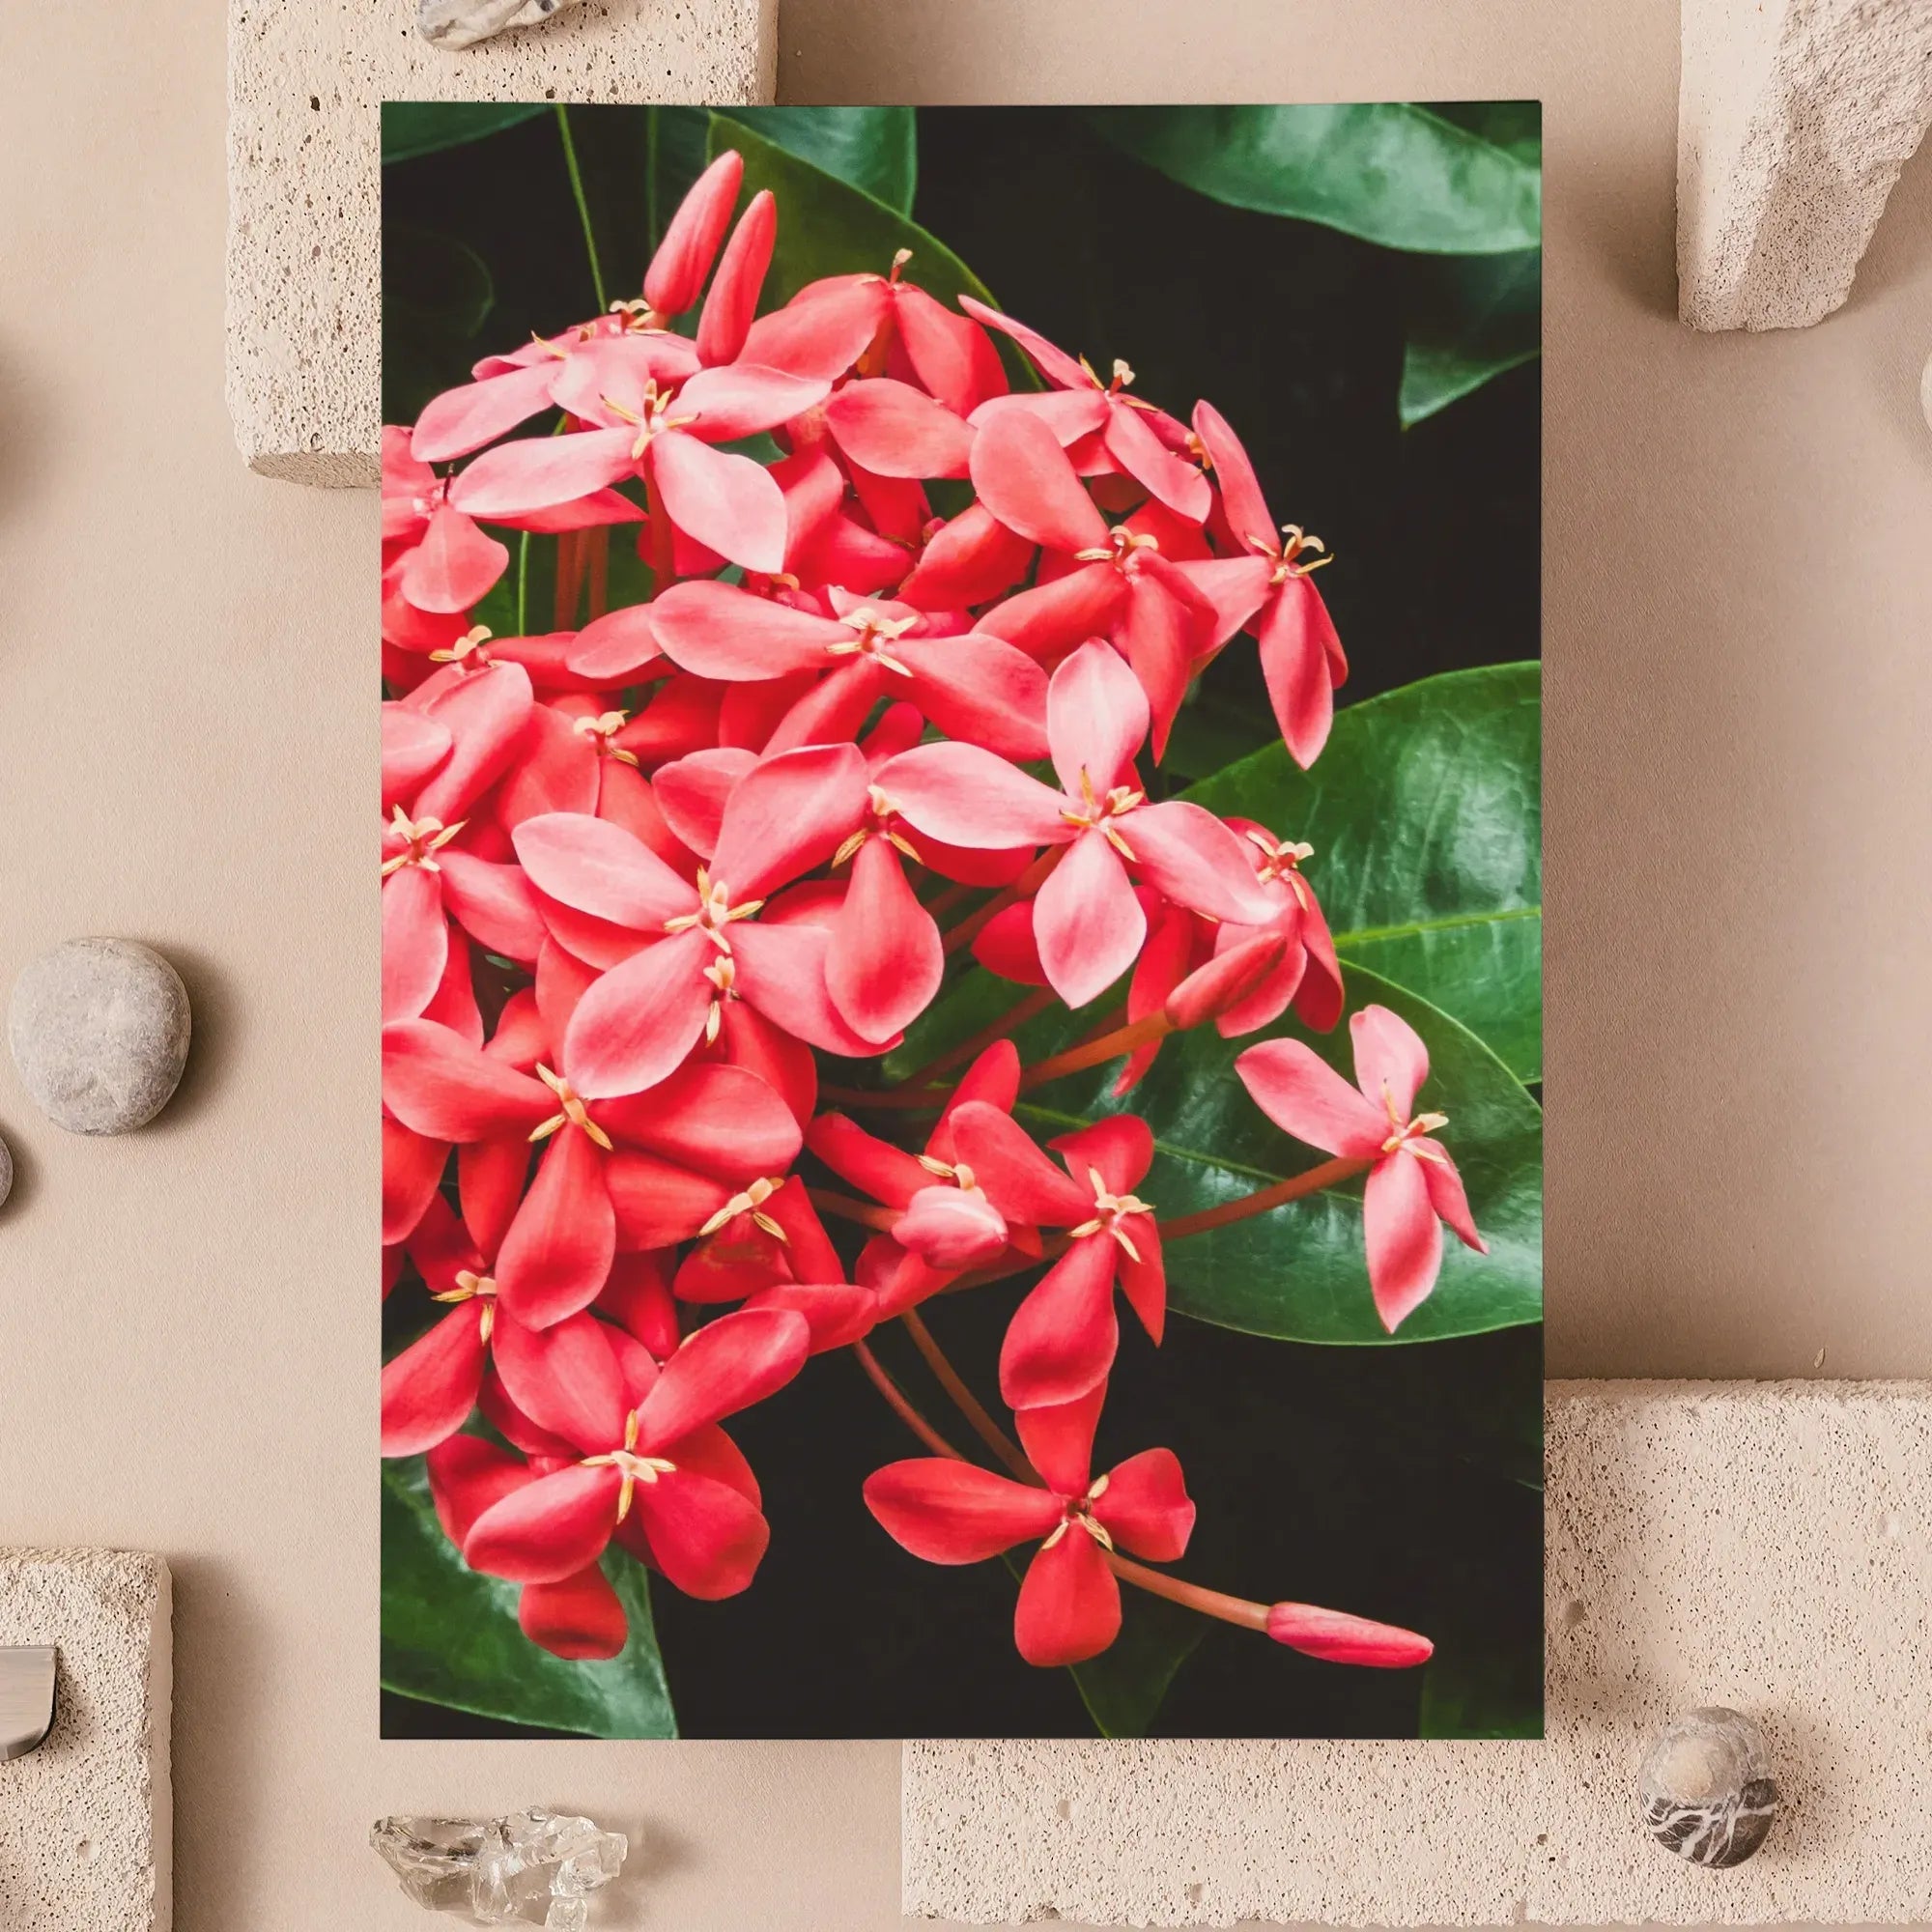 Belle Of The Ball - Chinese Ixora Flame Tree Greeting Card - Greeting & Note Cards - Aesthetic Art